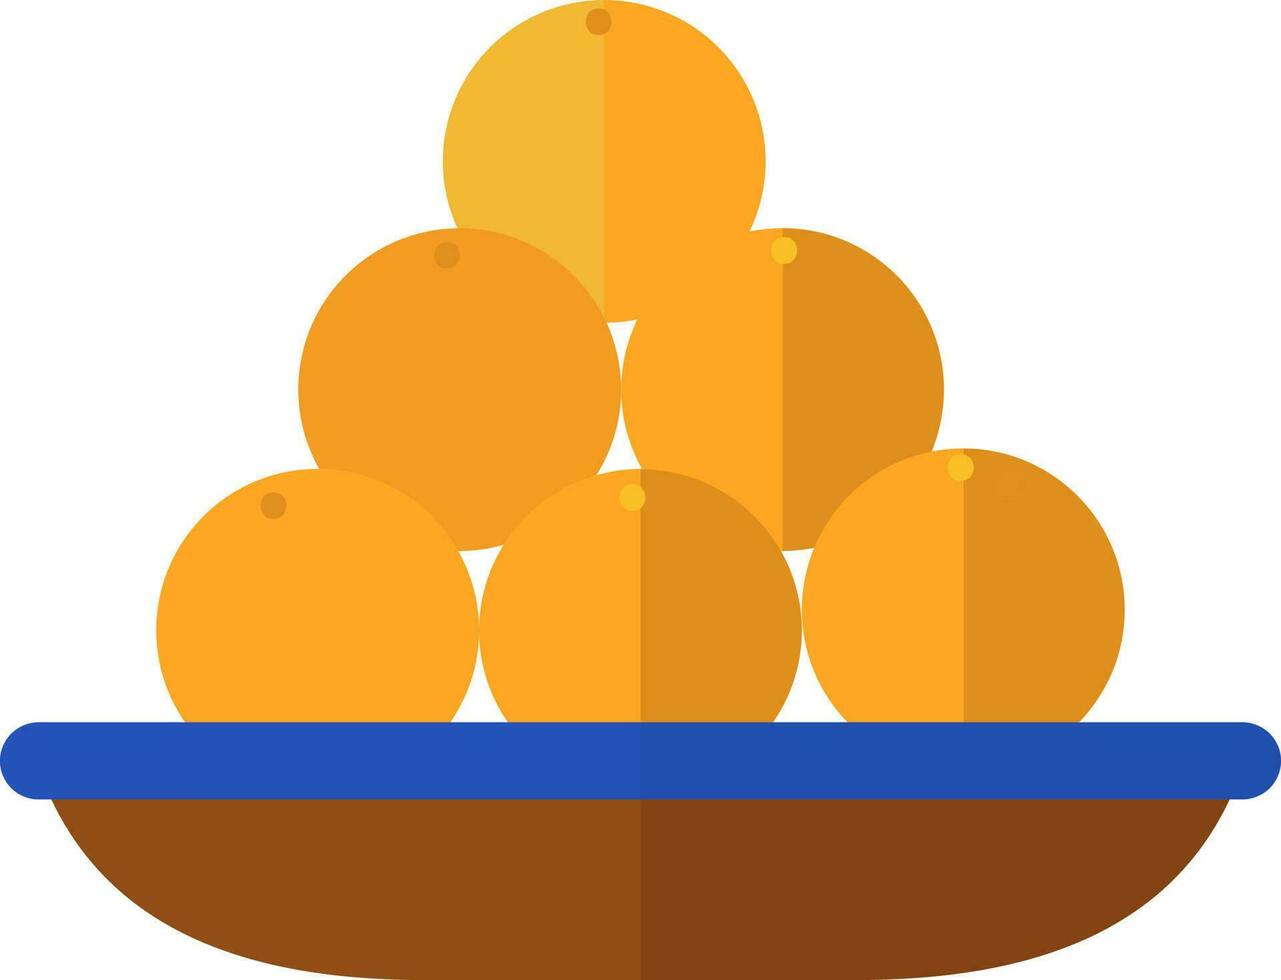 Indian Sweets Of Laddu Bowl Icon In Flat Style. vector